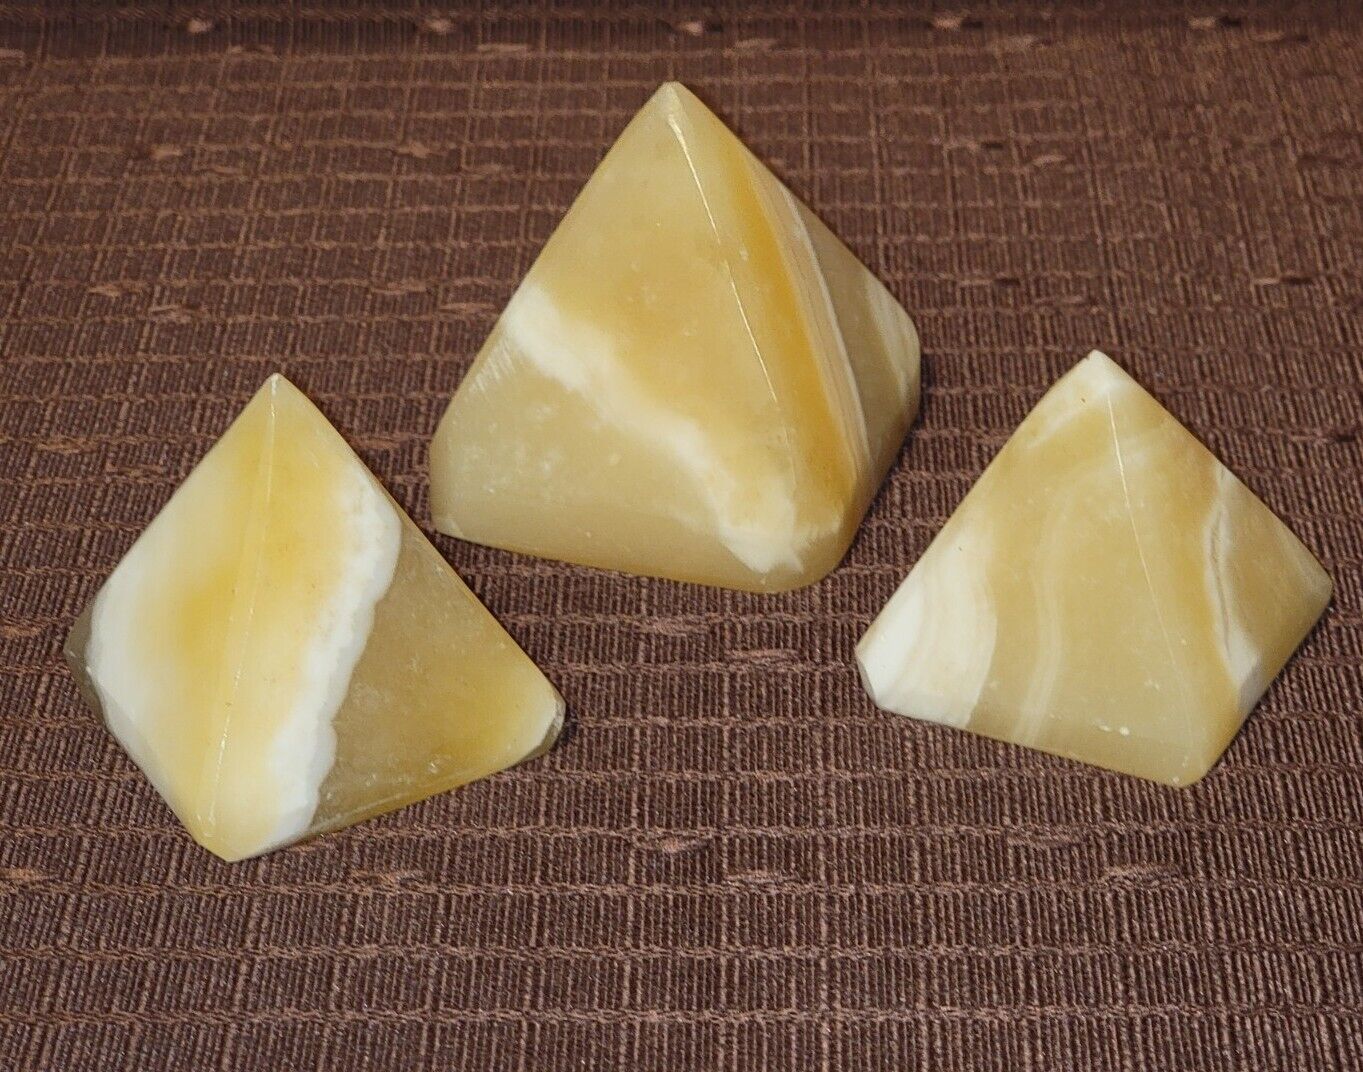 Set Of 3 Egyptian Alabaster Pyramid Stones Paperweight Decor Desk Accessories 